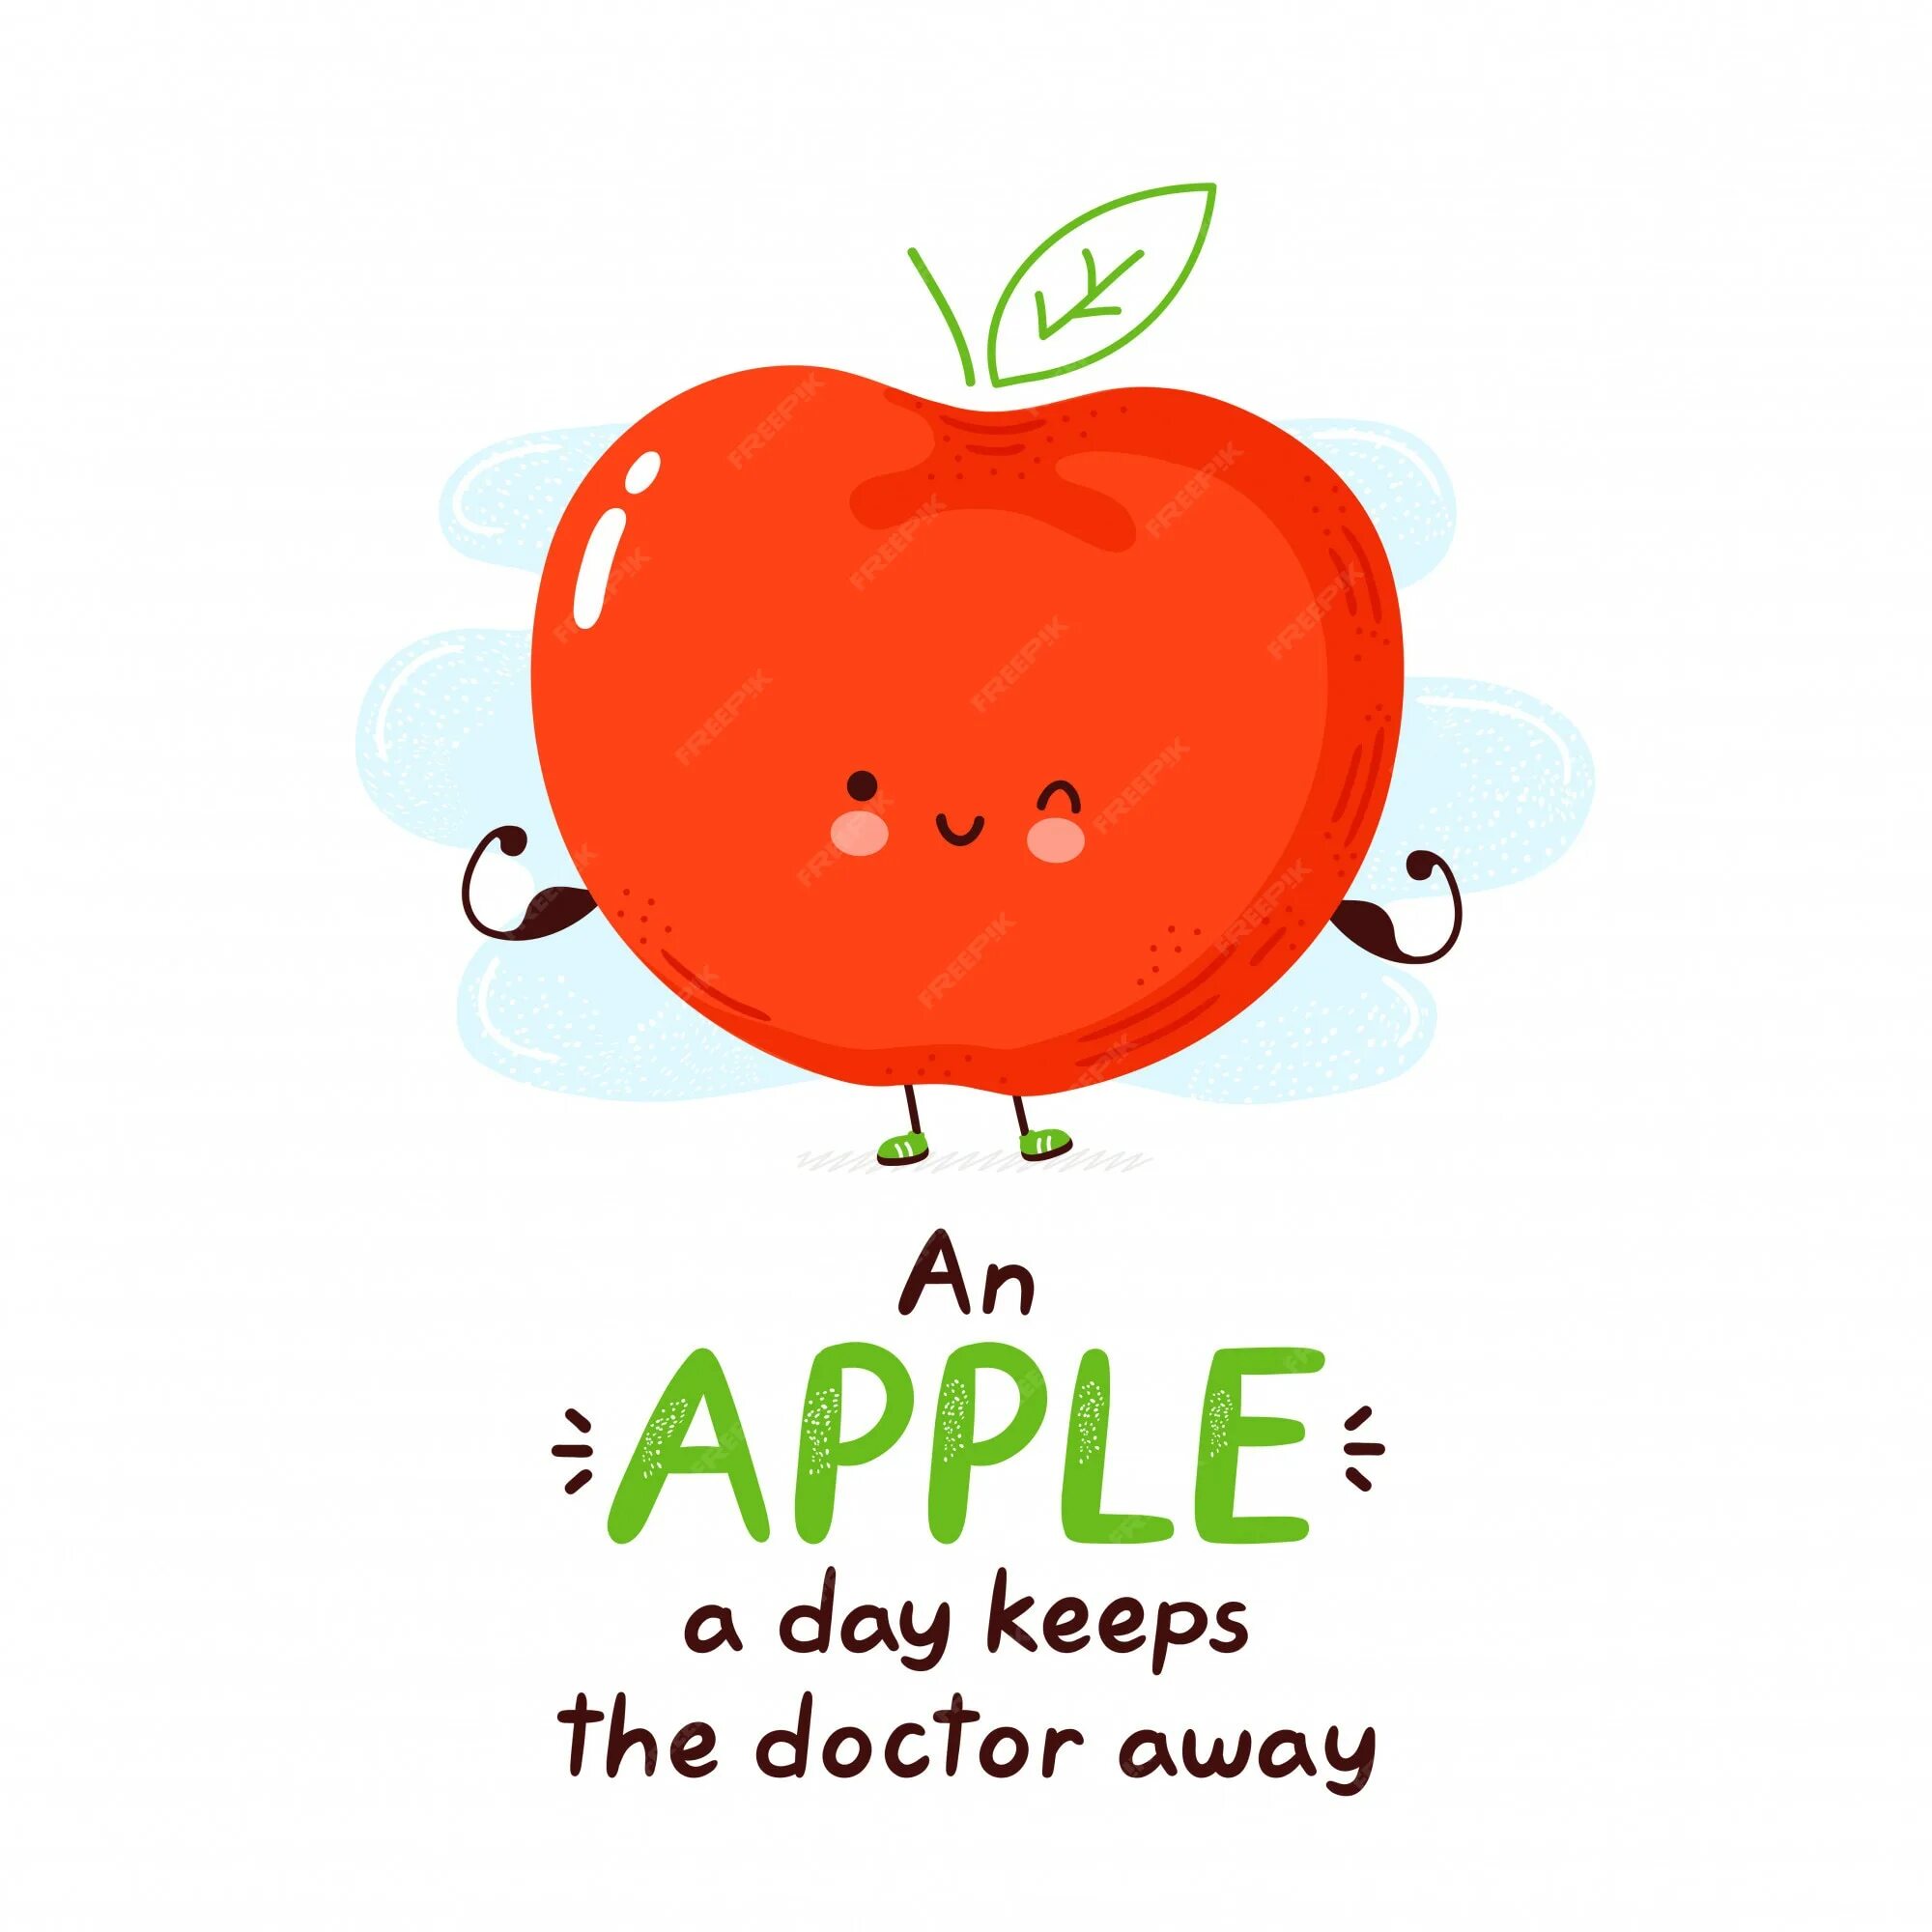 An a day keeps the doctor away. An Apple a Day keeps the Doctor away иллюстрация. An Apple a Day keeps the Doctor away идиома. An Apple a Day keeps the Doctor away картинки. Eat an Apple a Day keeps the Doctor away.